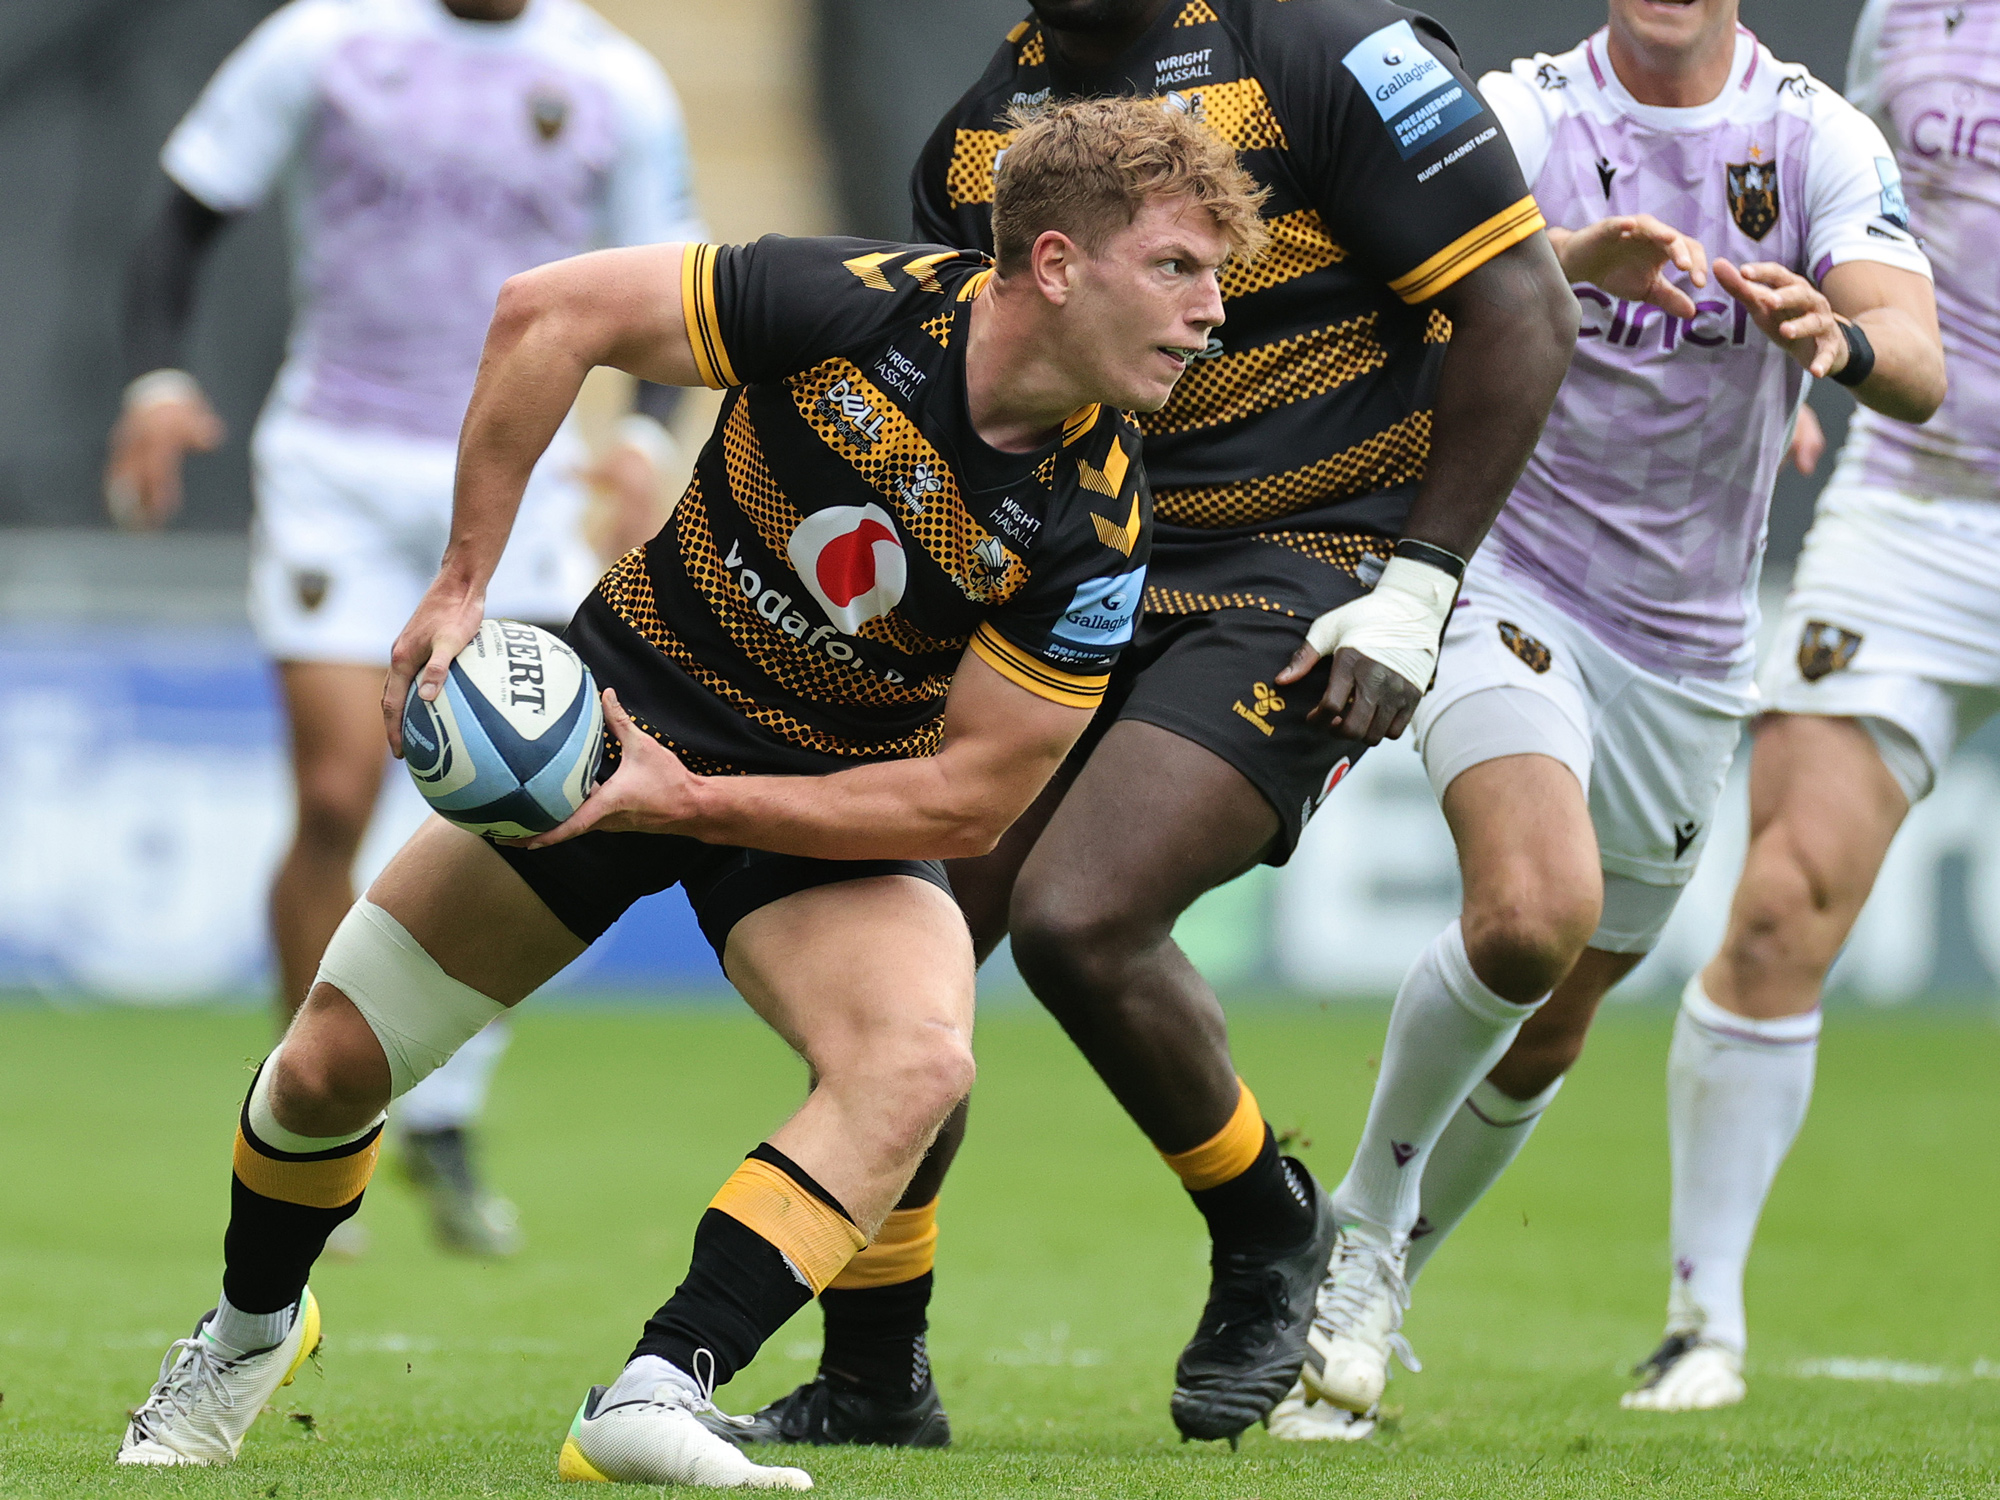 Wasps Englands Rugby Elite Have Lost Control of Their Finances